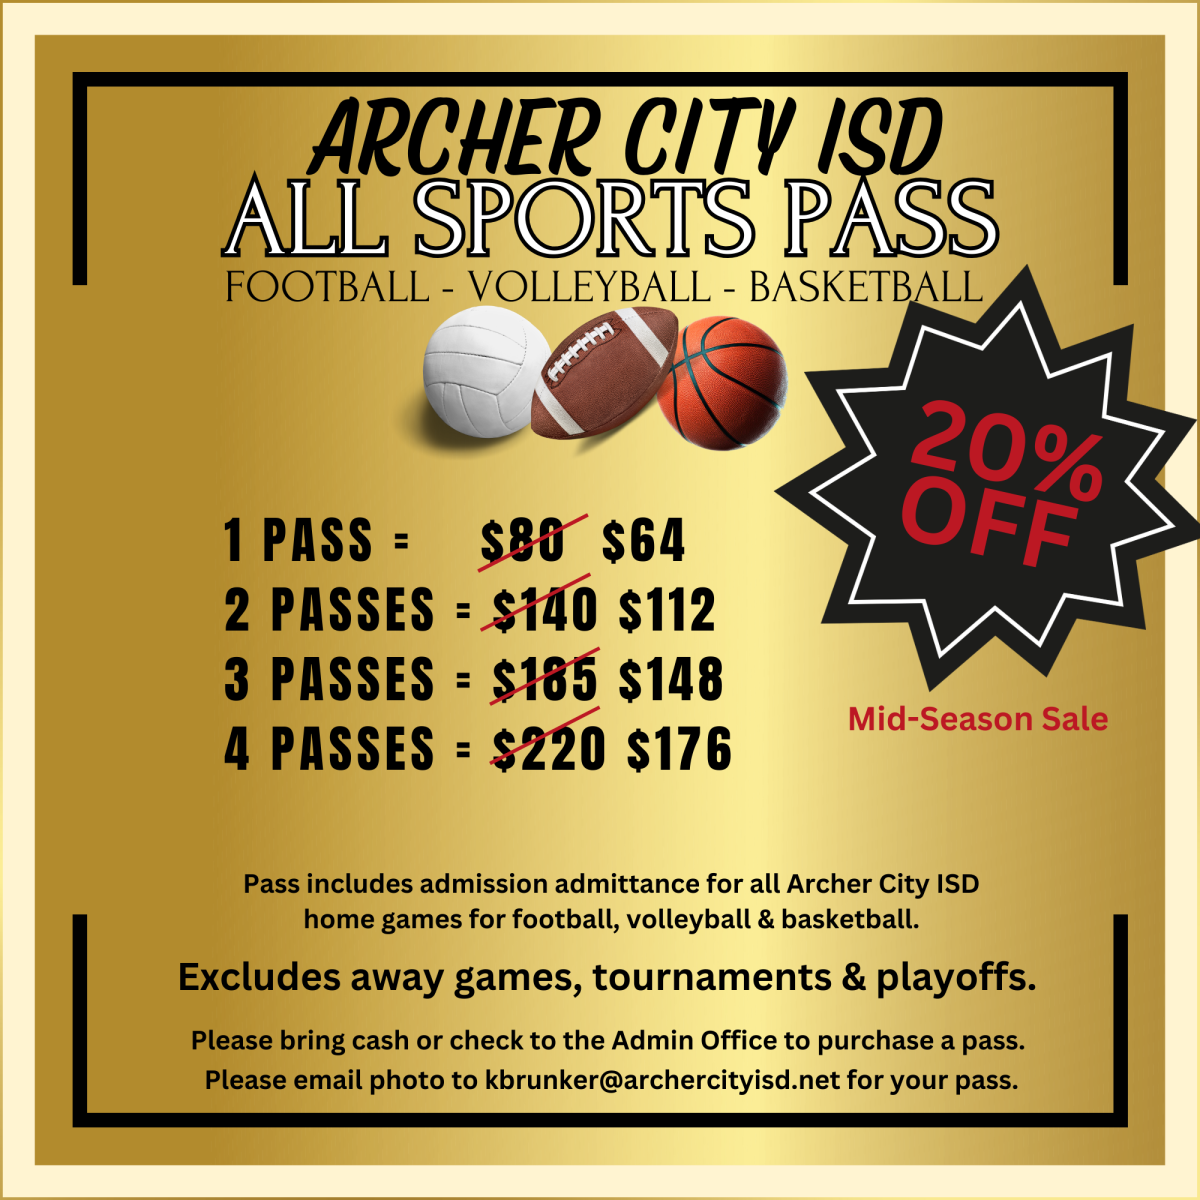 Mid-season sale for all sports pass